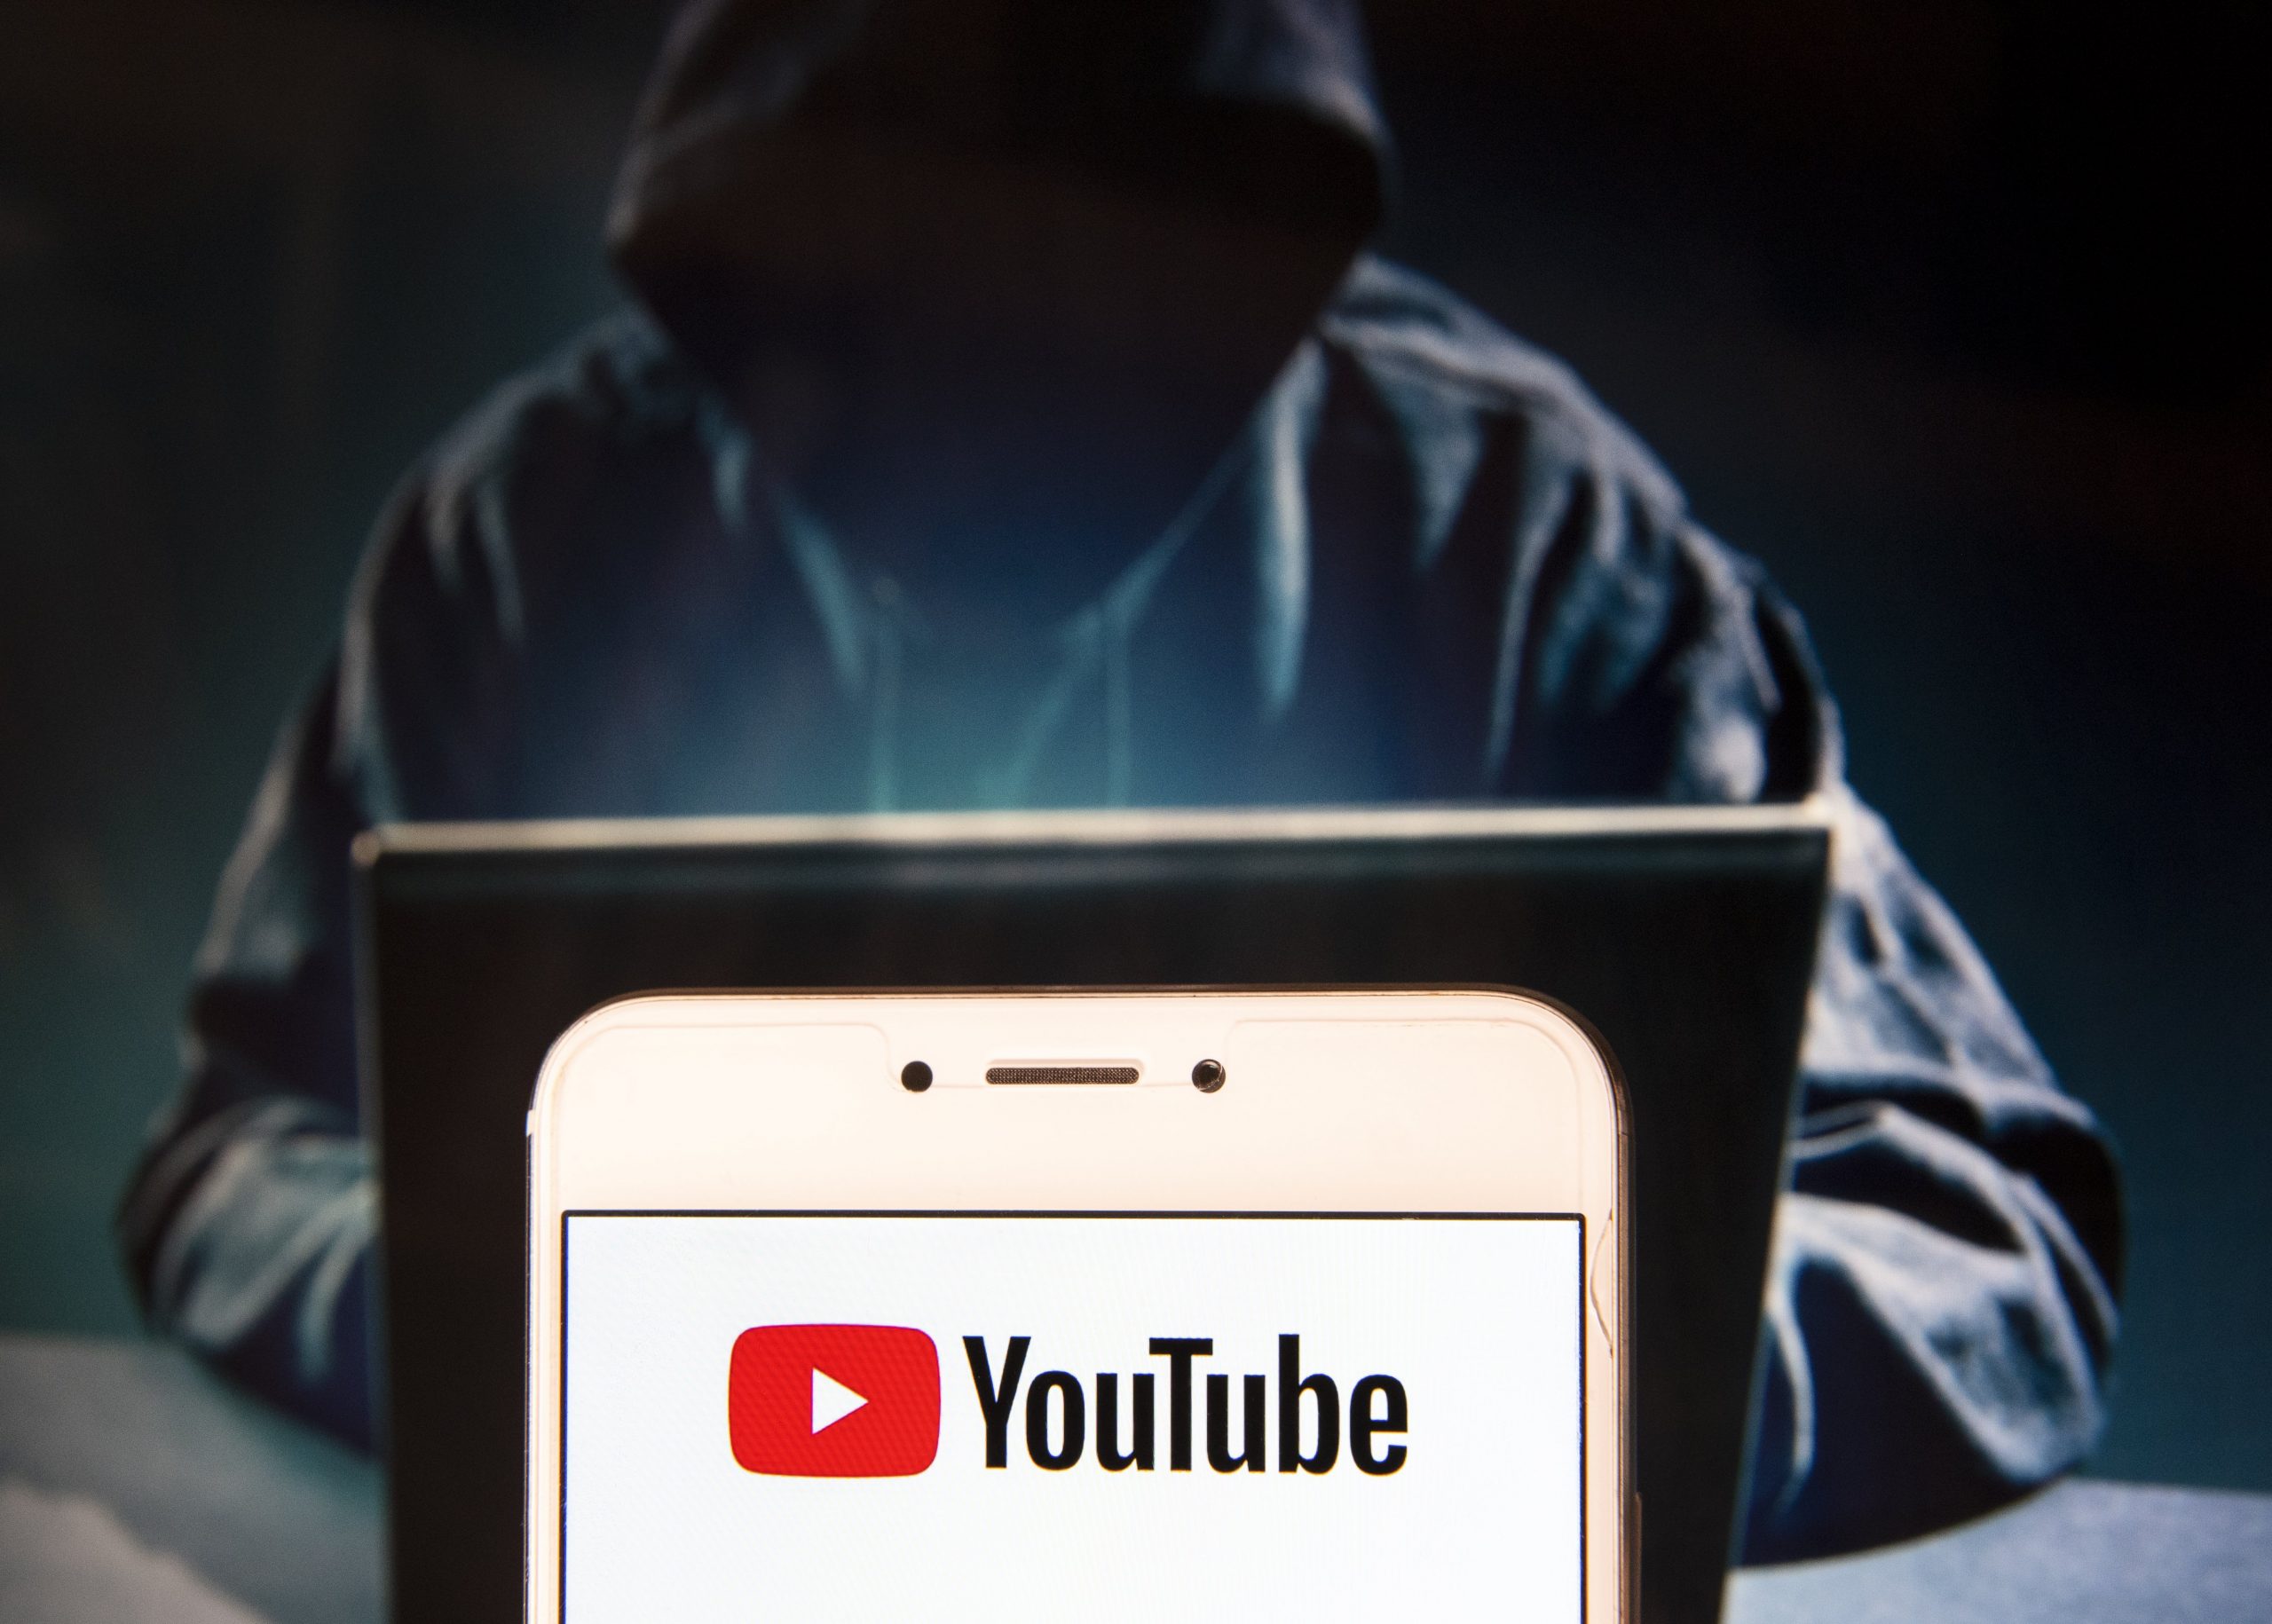 This $23 million YouTube music royalties heist is a huge reminder that online copyright is deeply flawed